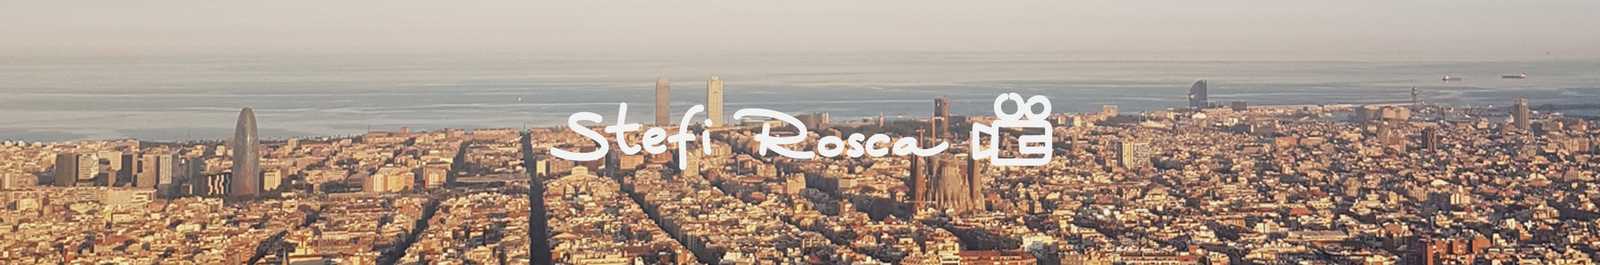 Banner image with my name: Stefi Rosca